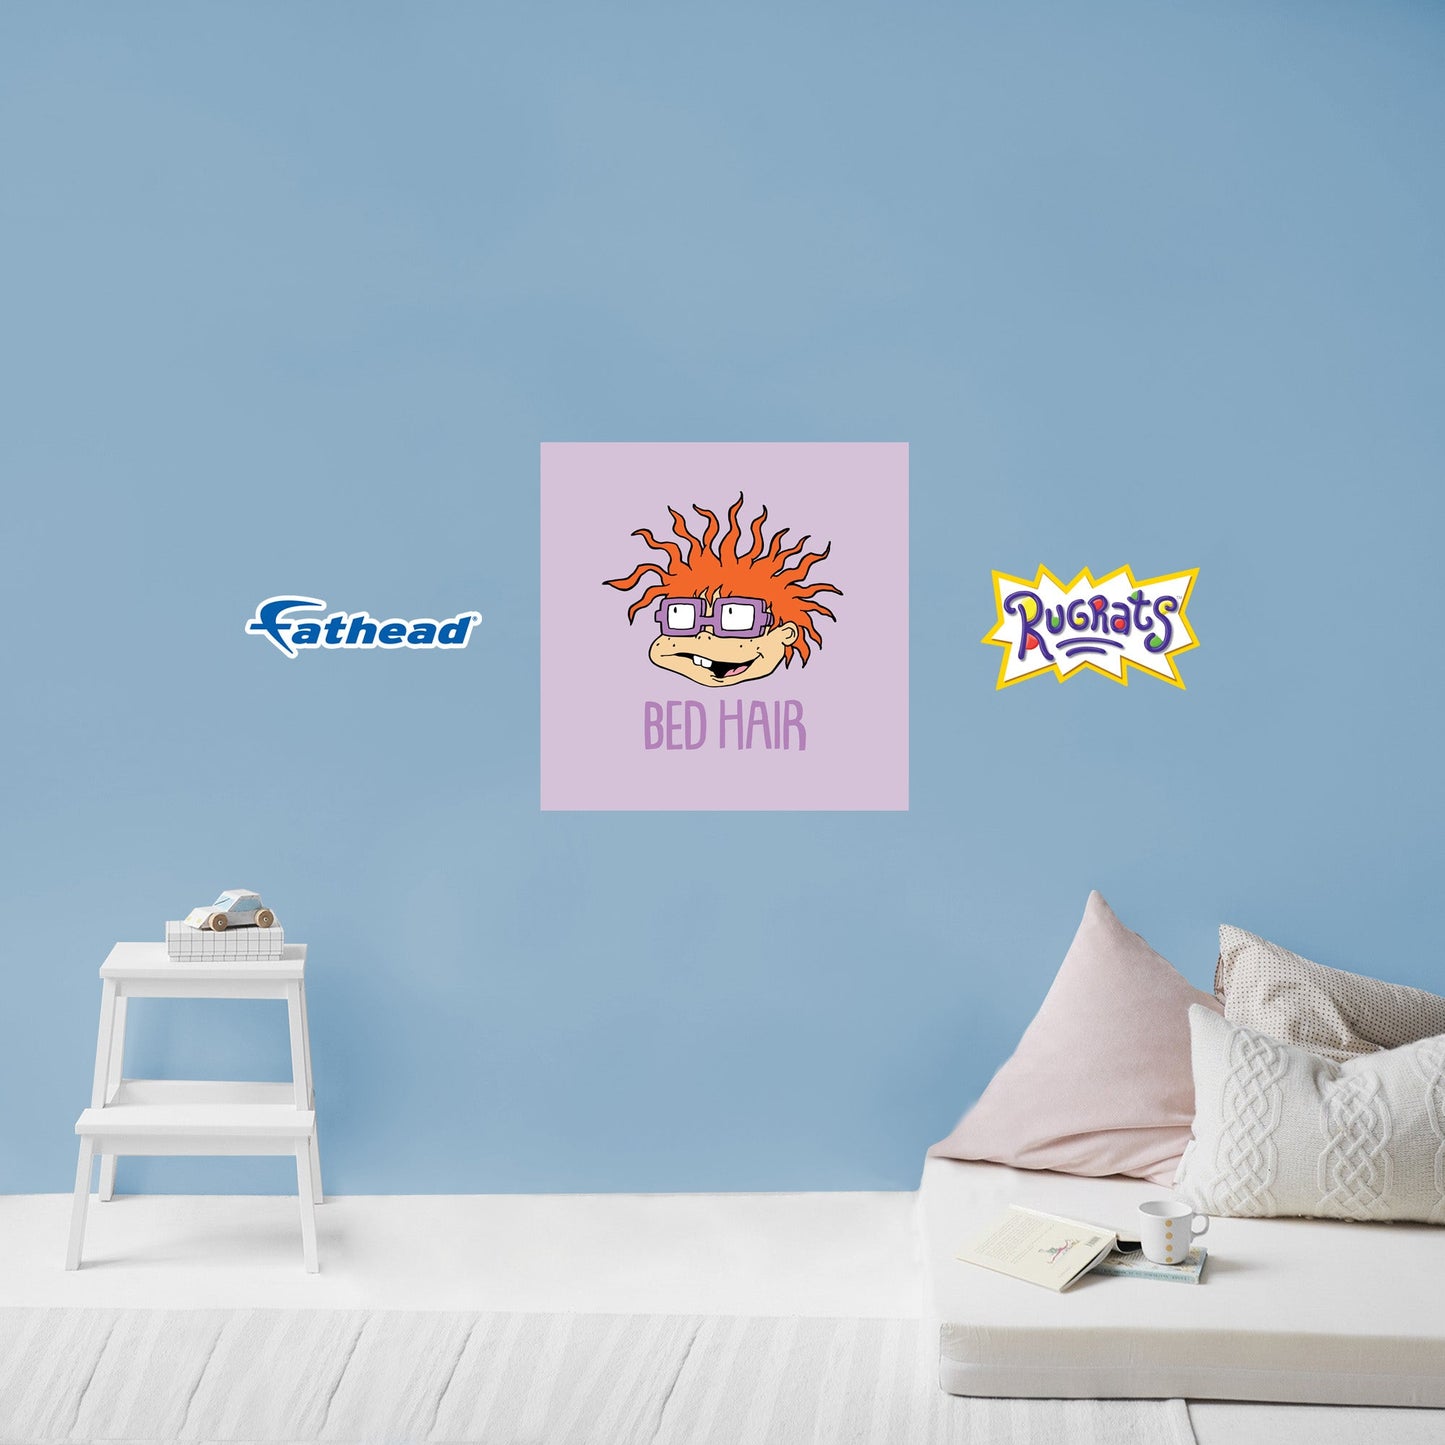 Rugrats: Bed Hair Poster - Officially Licensed Nickelodeon Removable Adhesive Decal